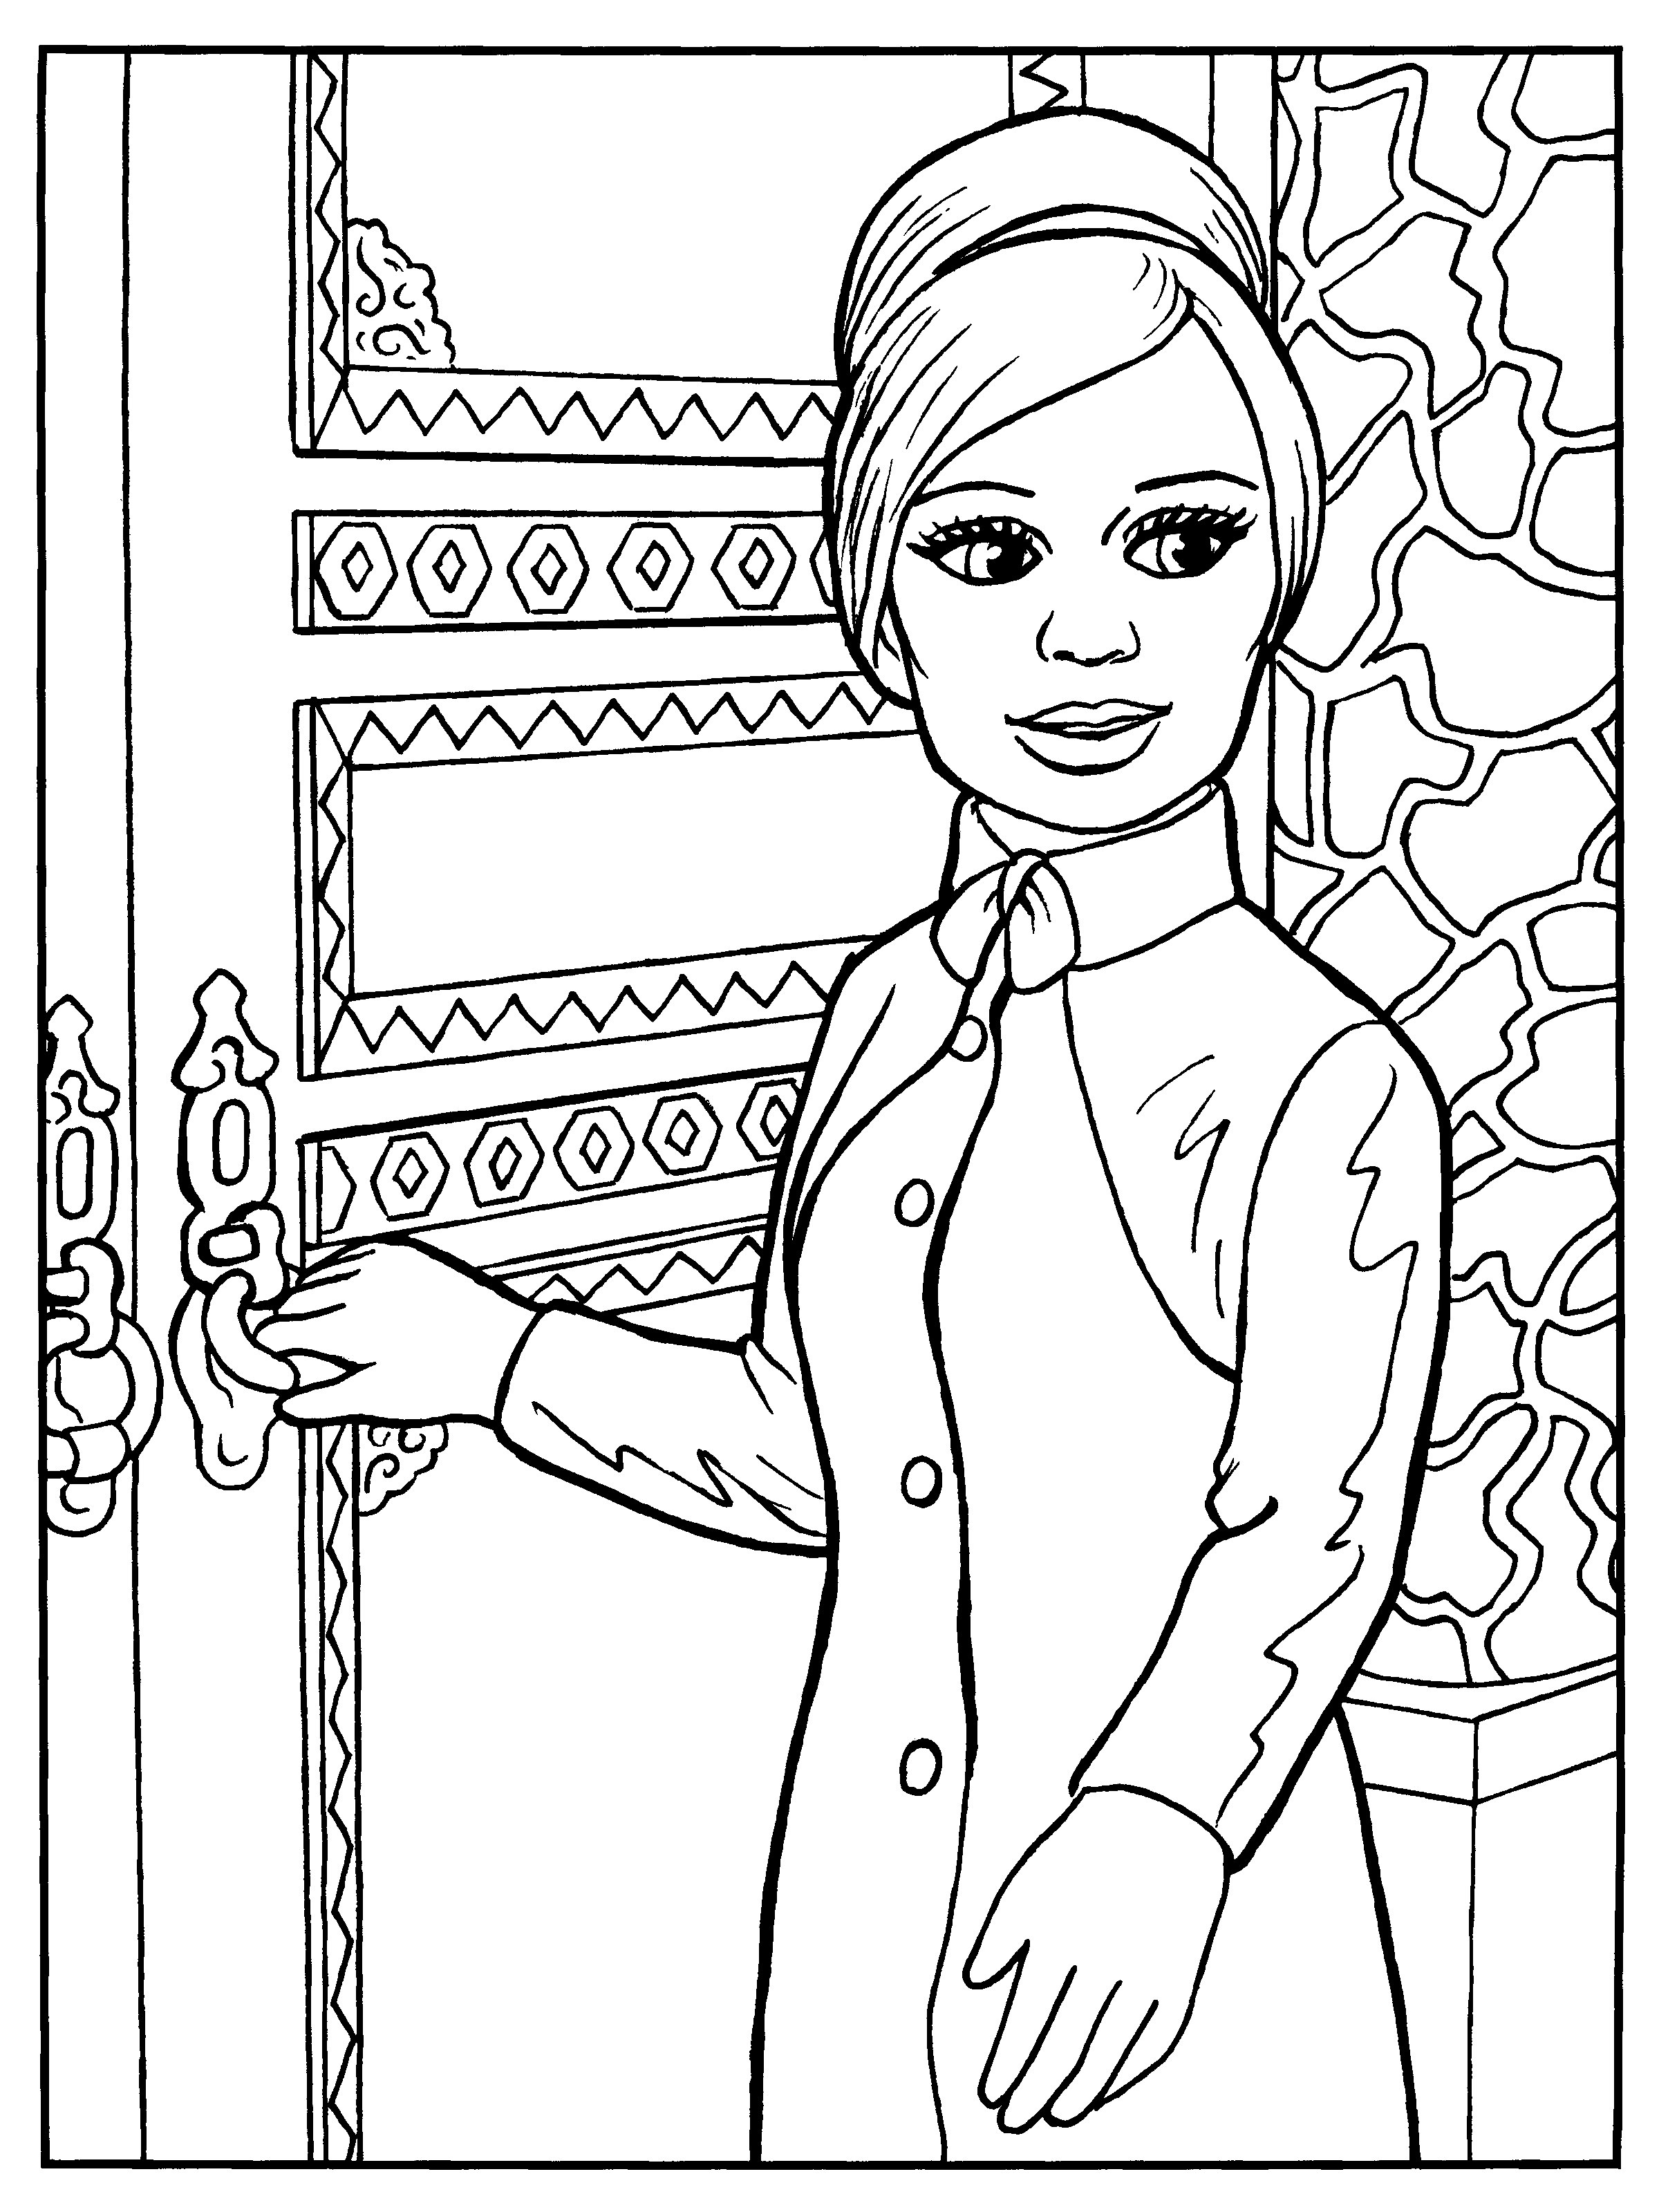 Thunderbirds coloring pages